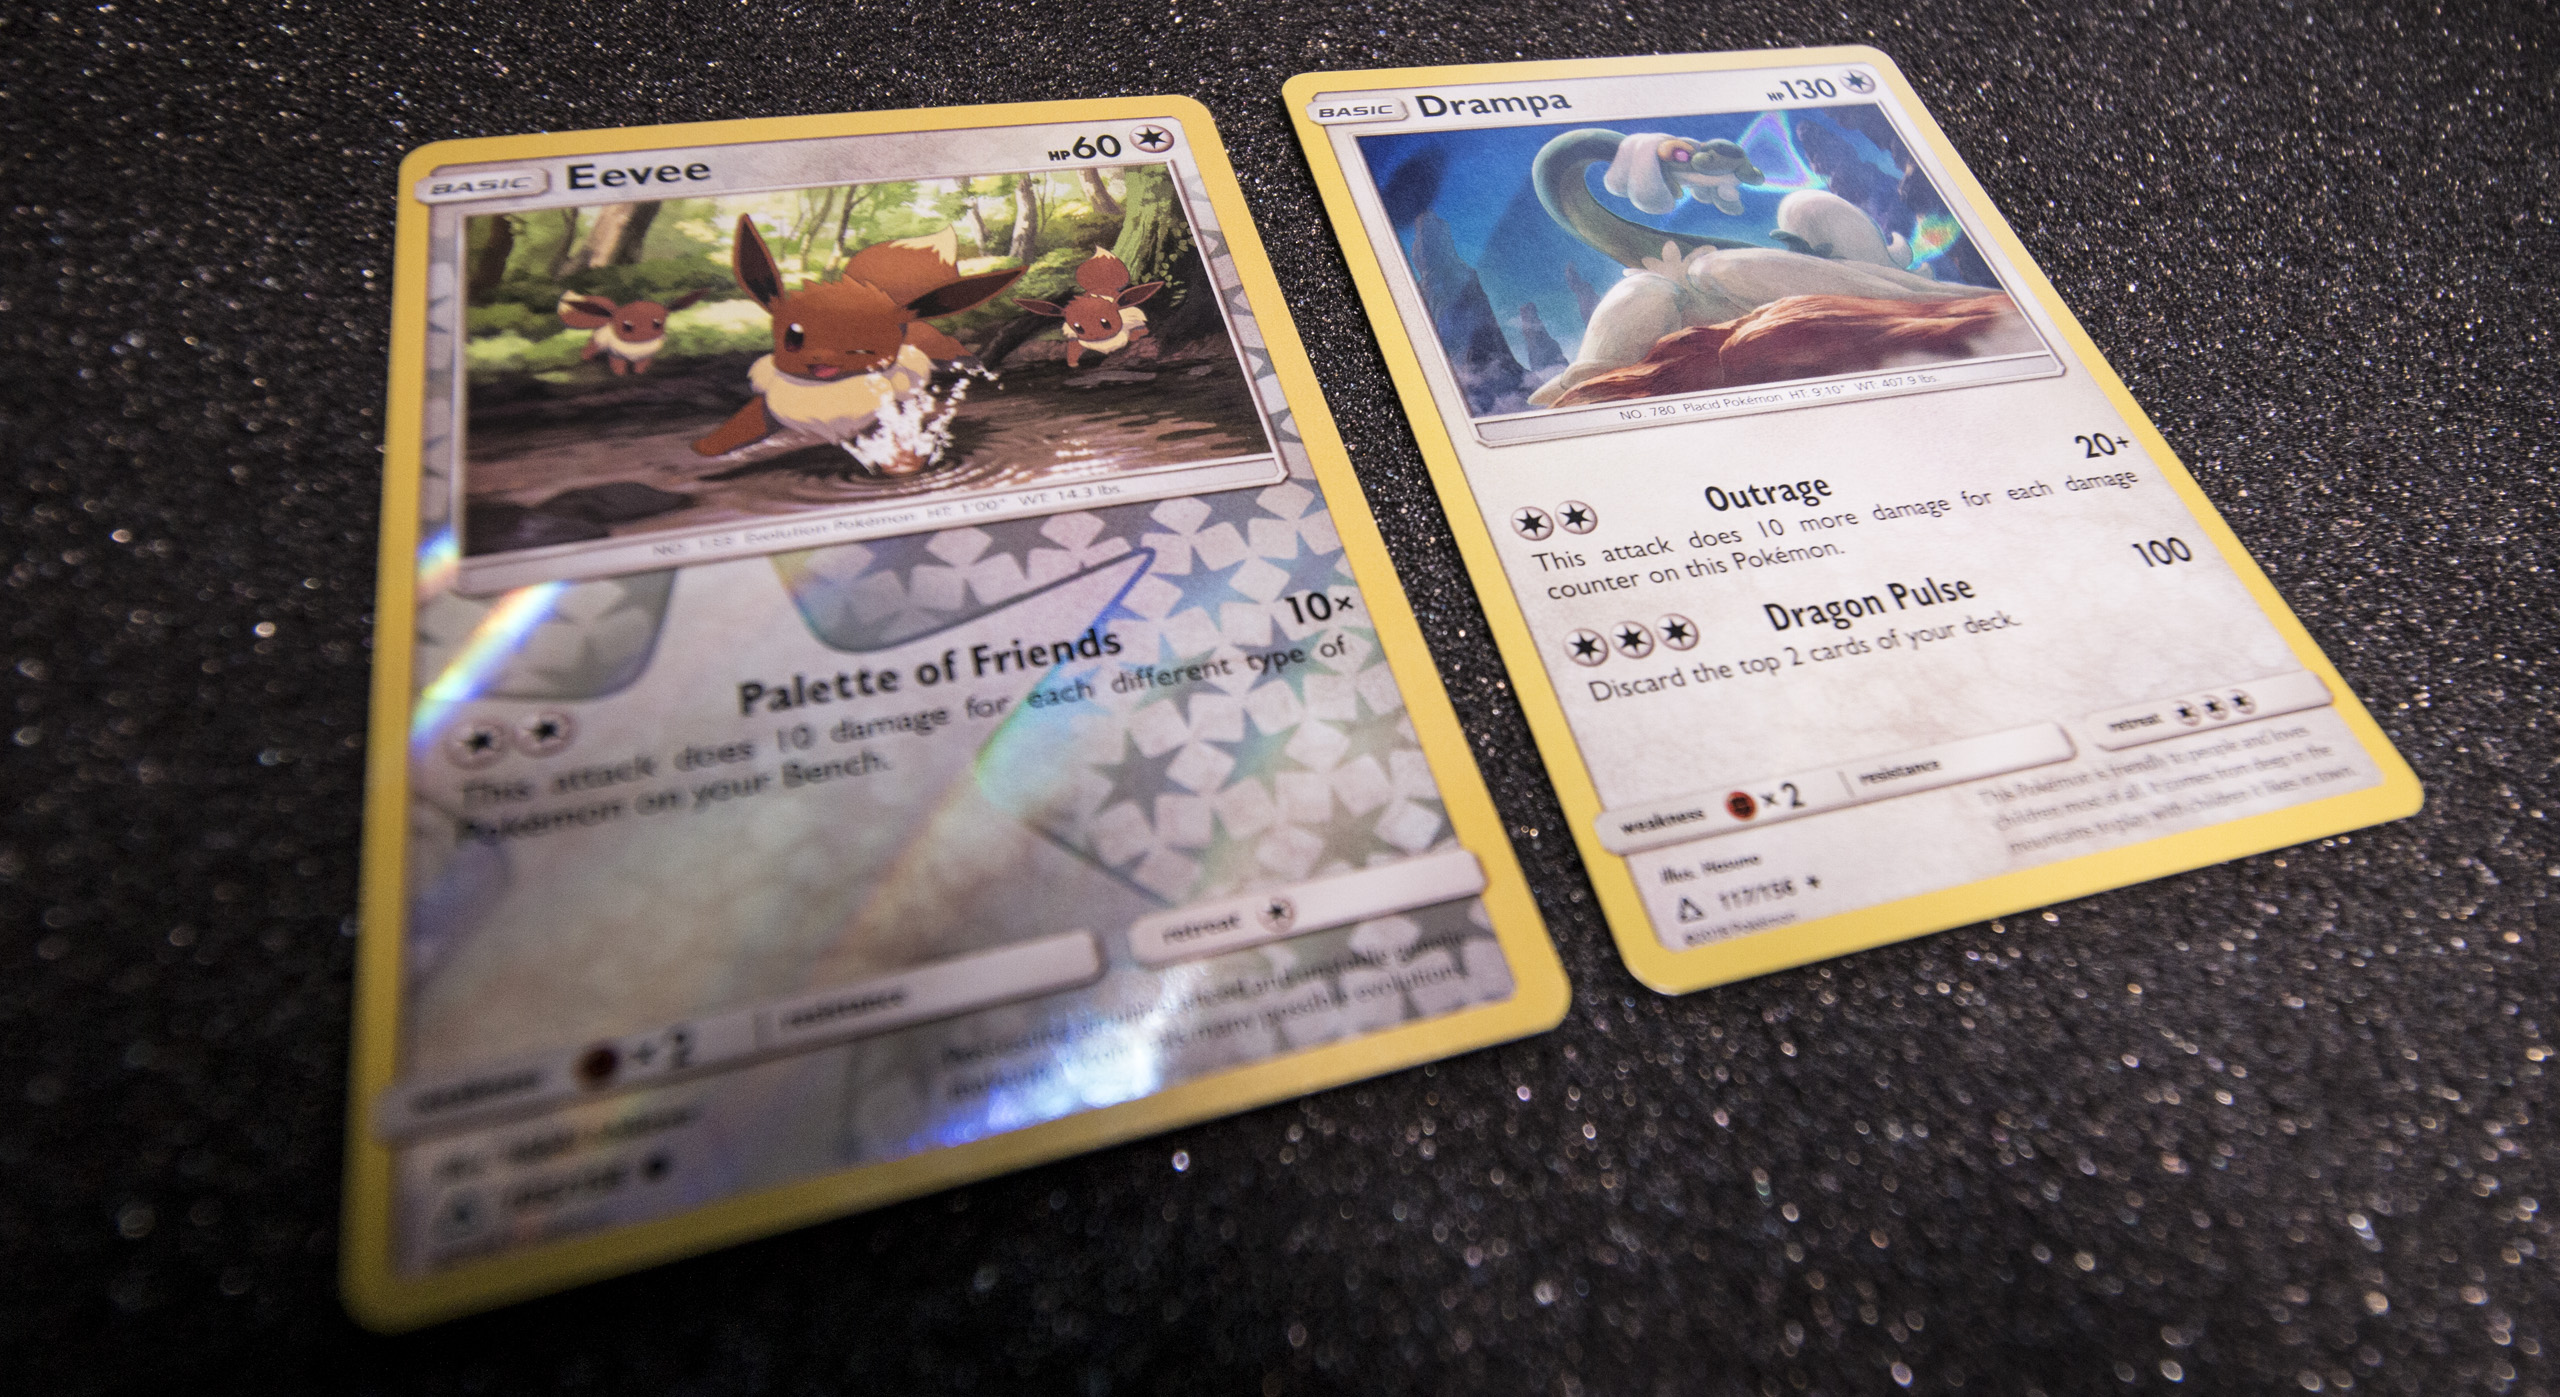 Let’s Open Some Pokemon Ultra Prism Cards And See If There’s Anything Good